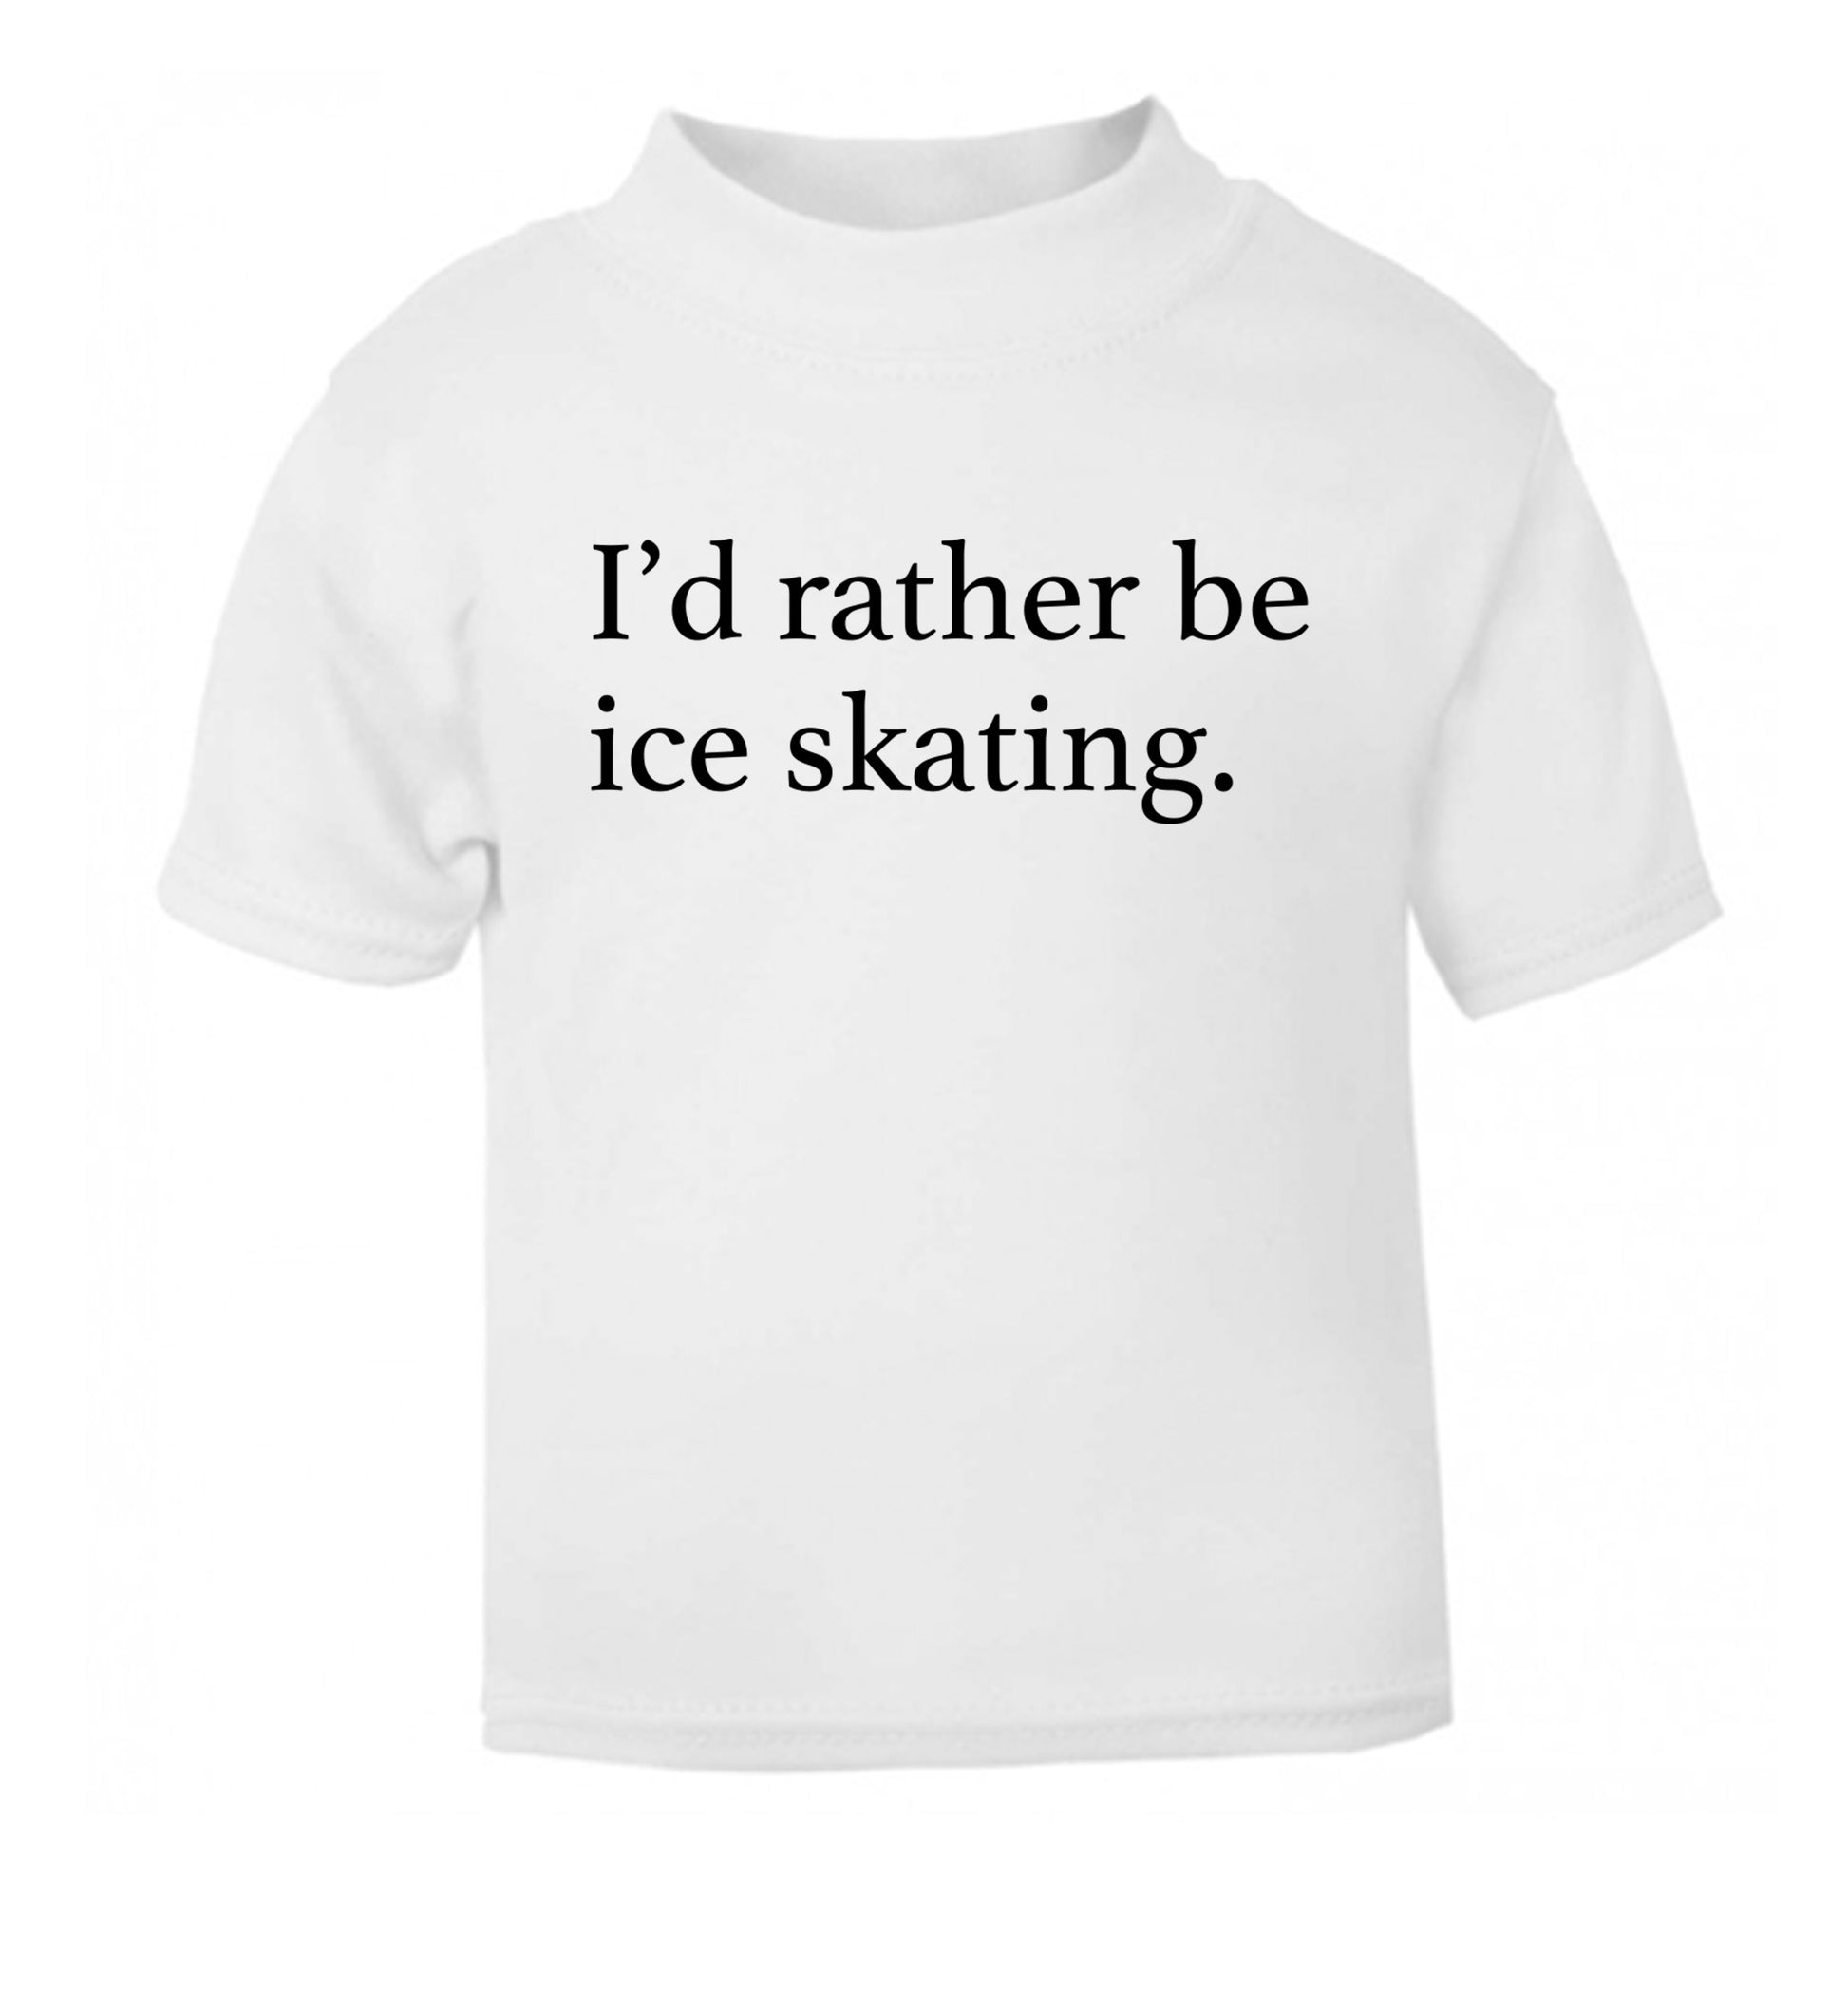 I'd rather be ice skating white Baby Toddler Tshirt 2 Years